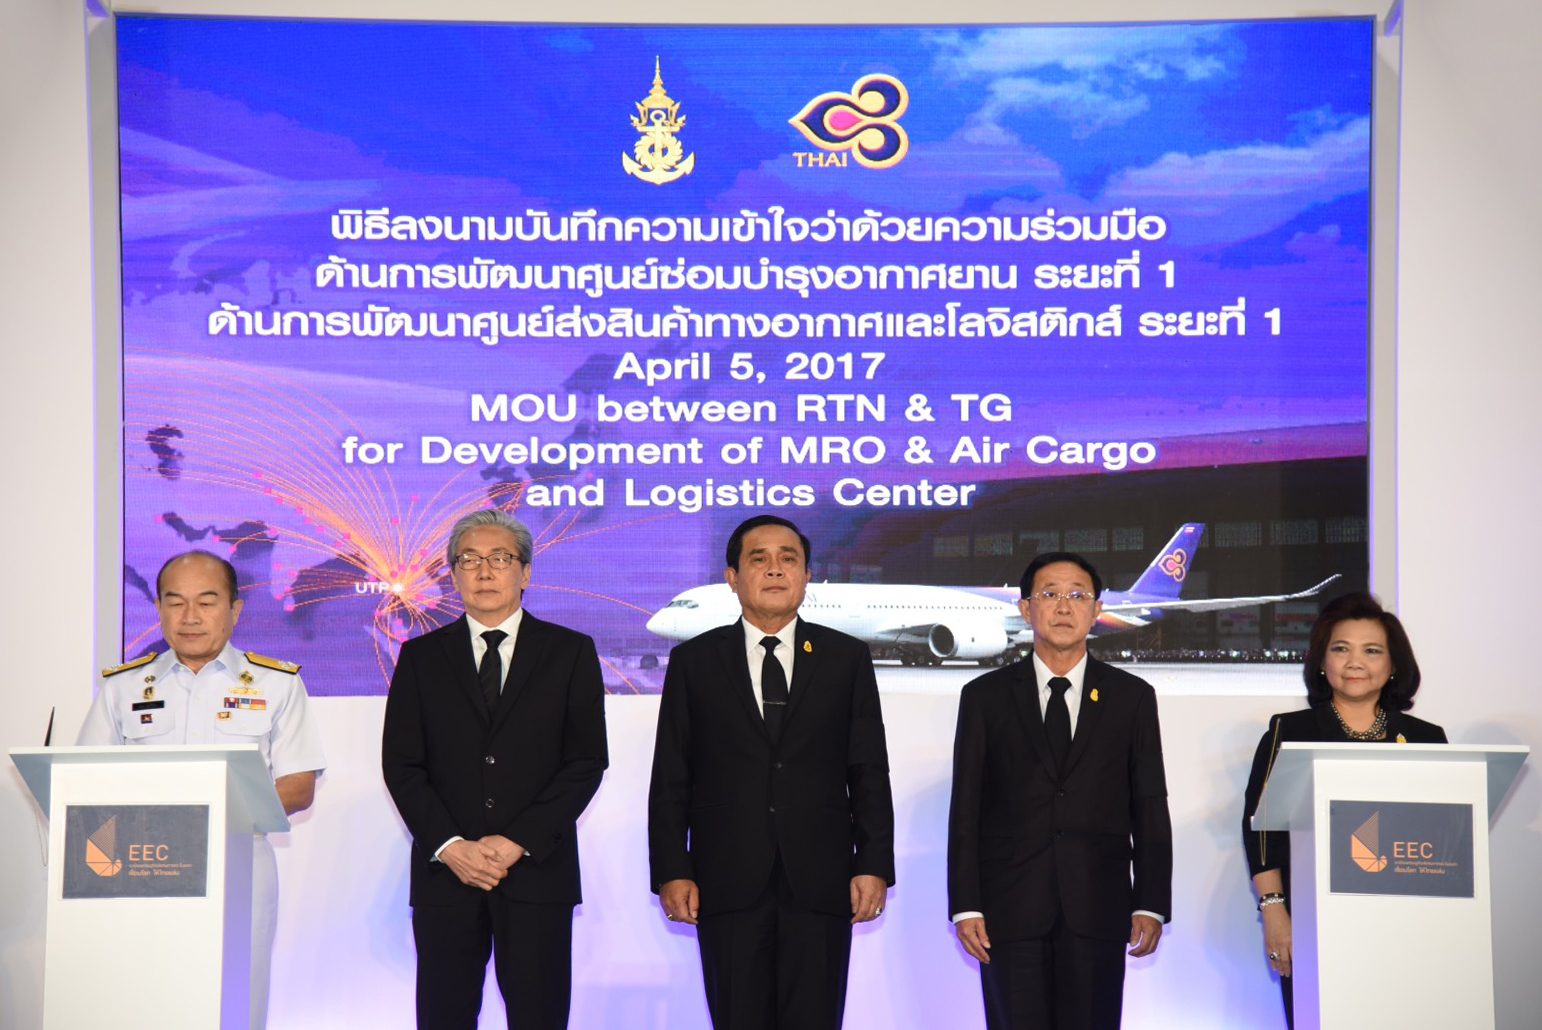 Prime Minister General Prayut Chan-o-cha (center) presided over the Memorandum of Understanding signing ceremony between Thai Airways International Public Company Limited and the Royal Thai Navy on phase one in the development of the new aircraft maintenance center, and air cargo and logistics center.